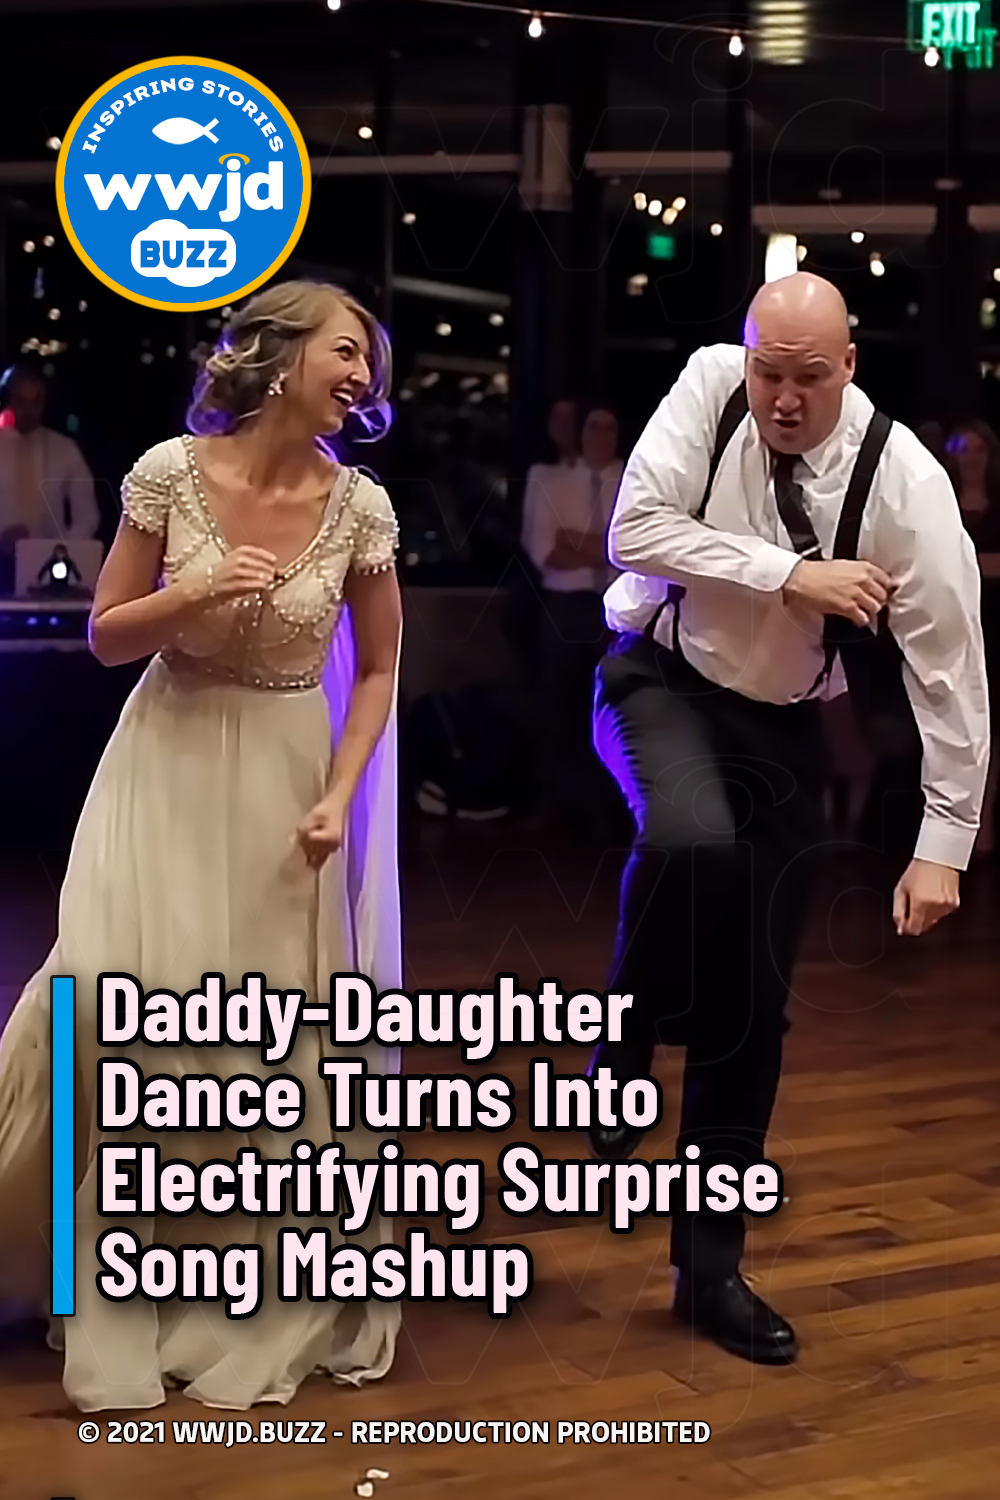 Daddy-Daughter Dance Turns Into Electrifying Surprise Song Mashup